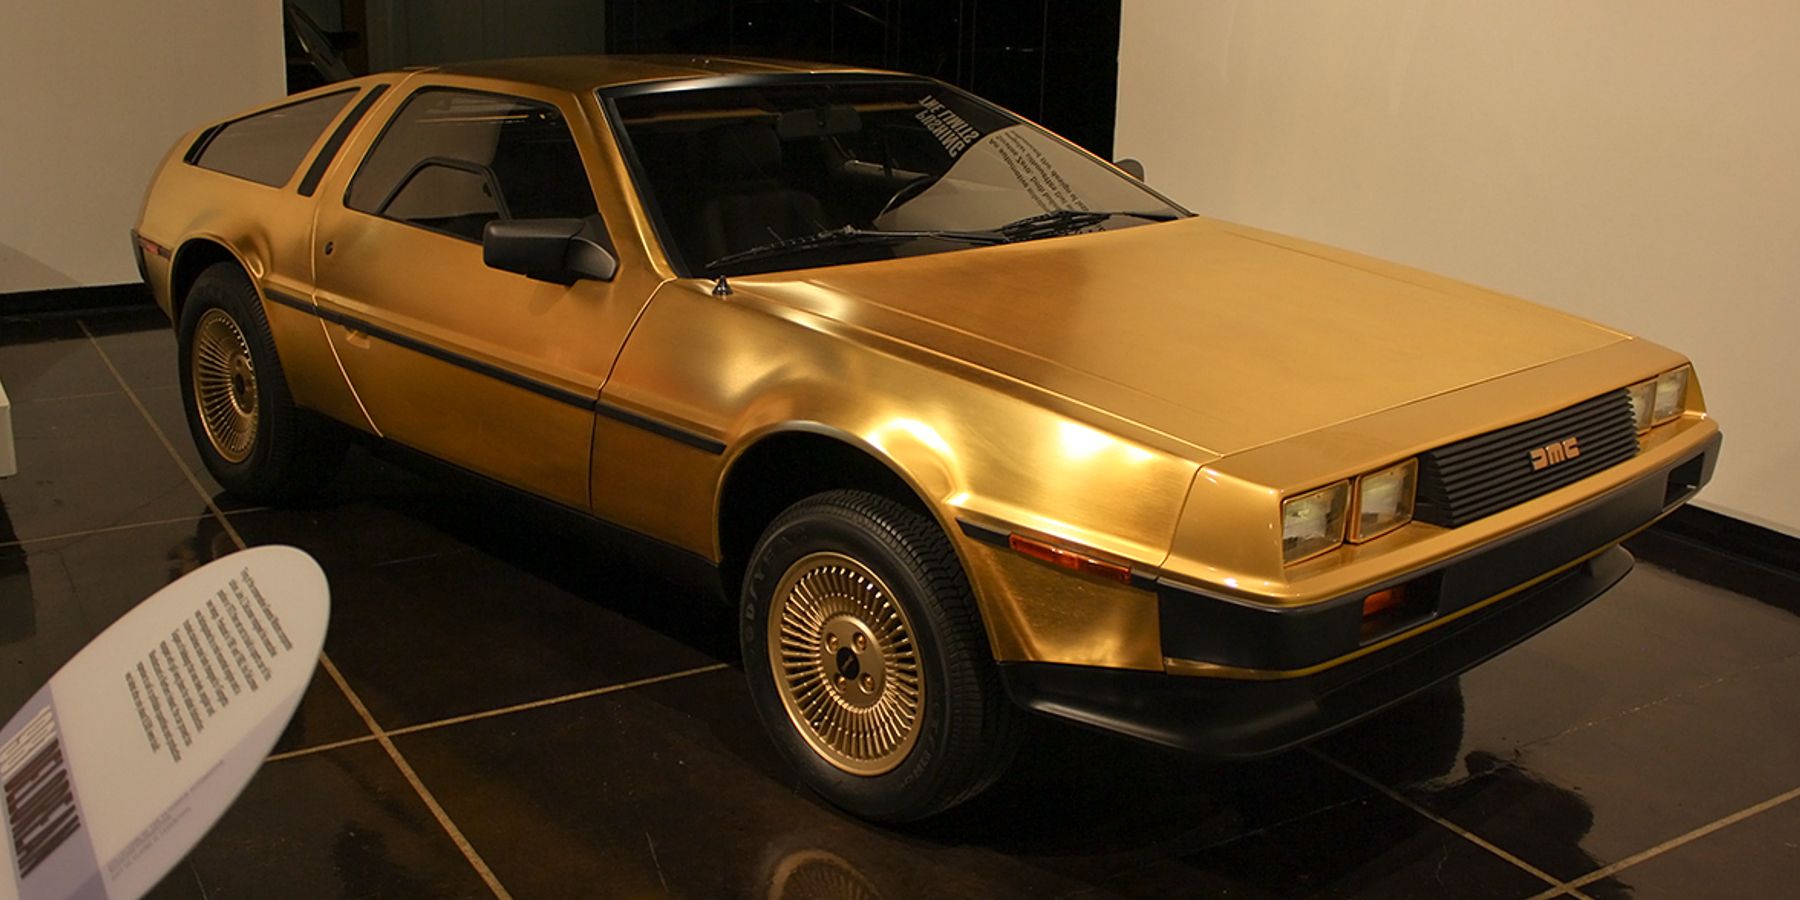 A golden DeLorean on display at a museum